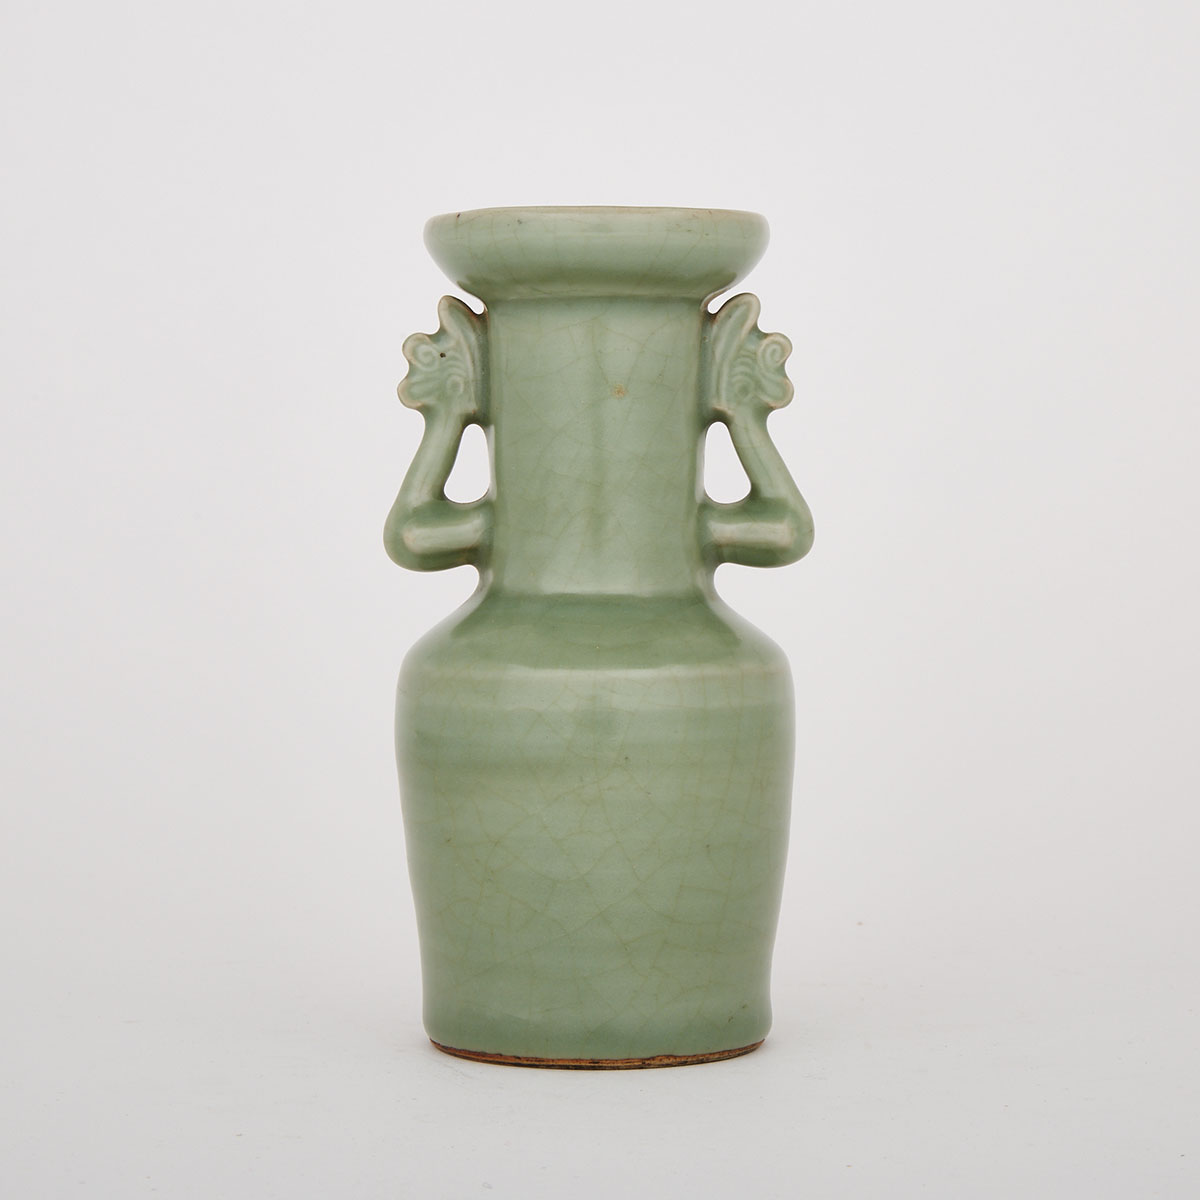 A Longquan Mallet Vase, Ming Dynasty or Later